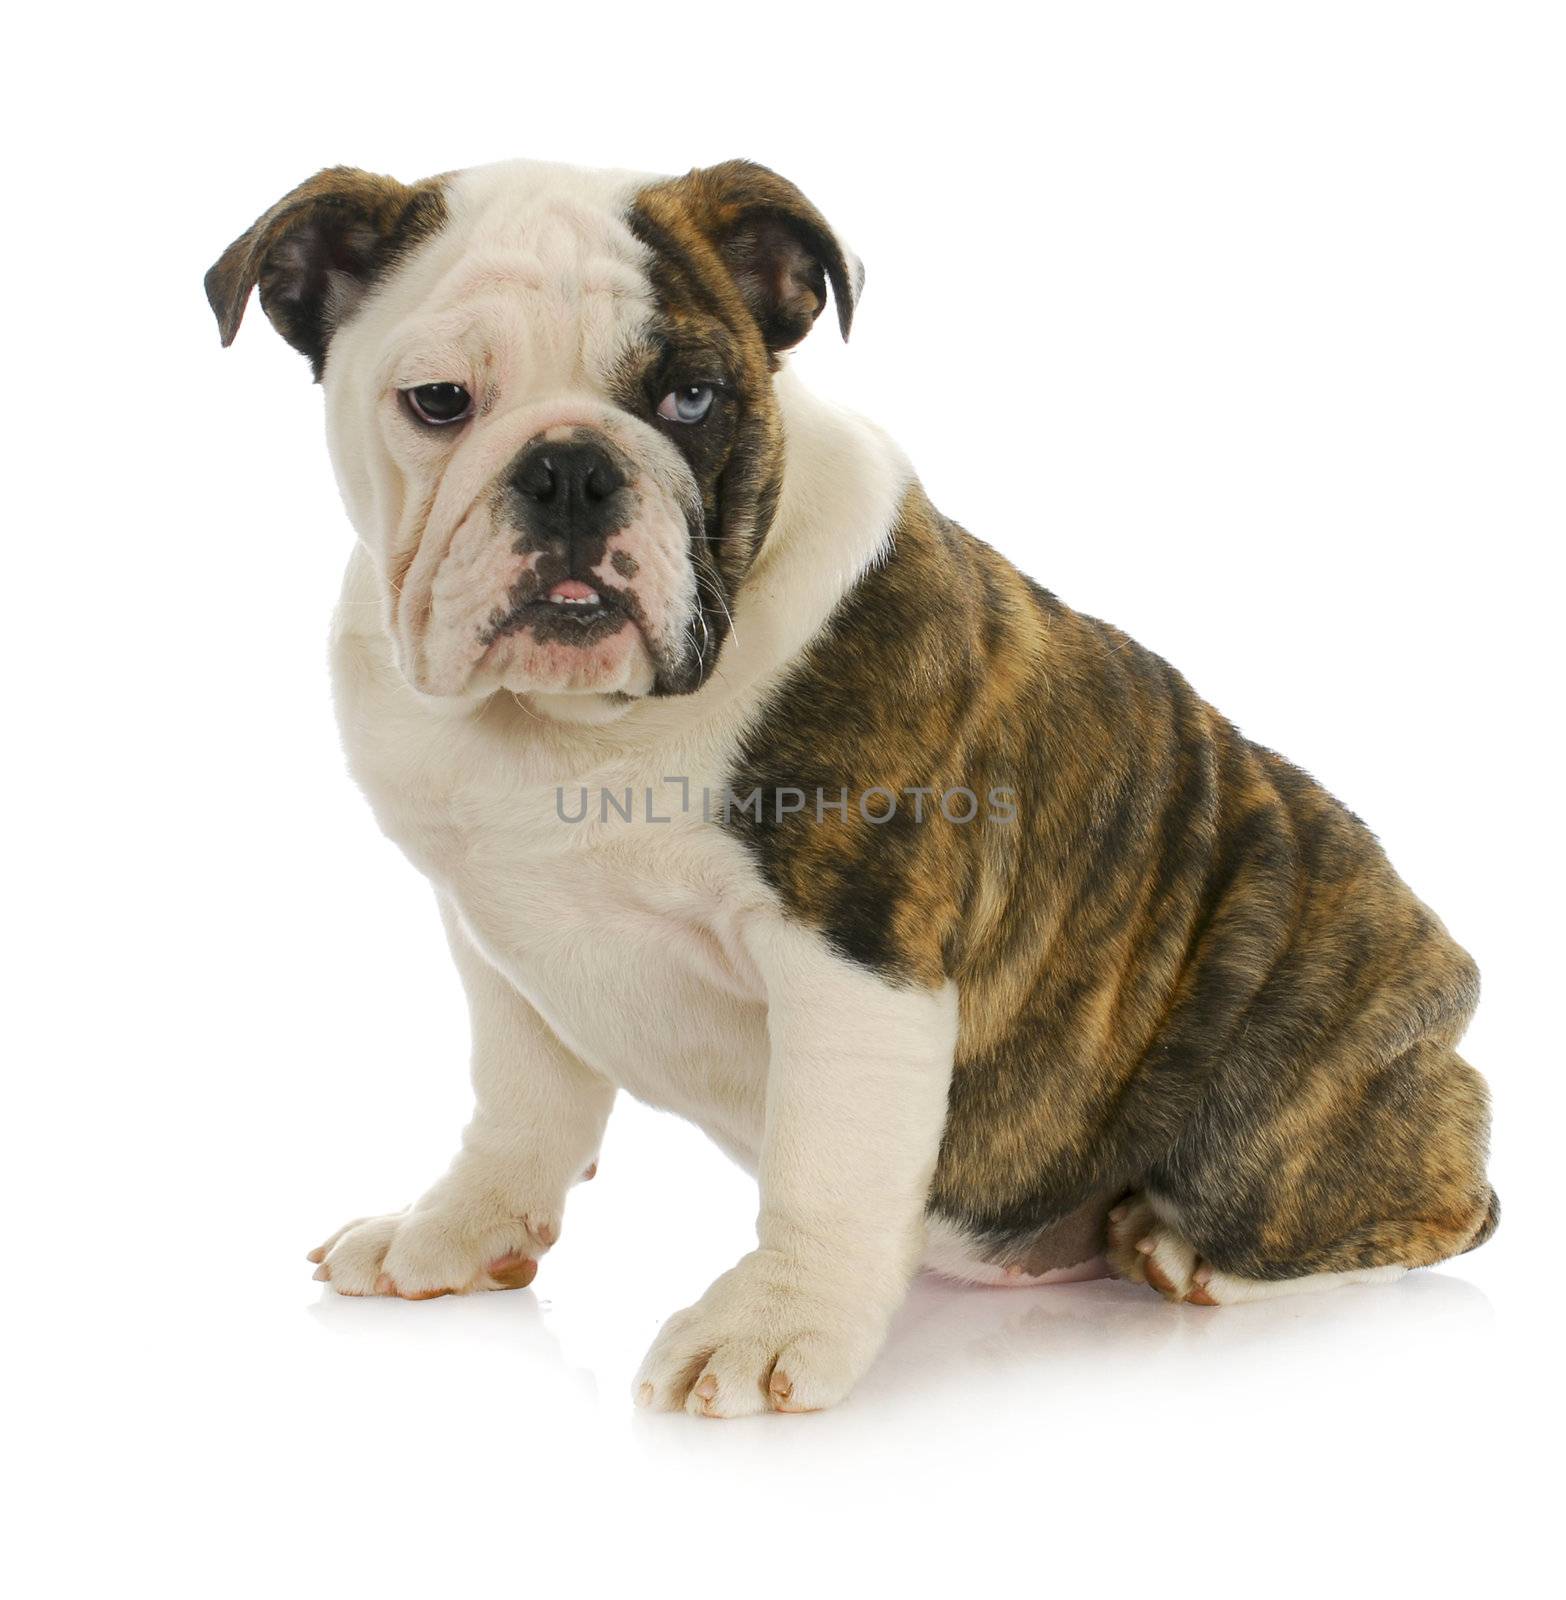 cute puppy - english bulldog puppy with one brown eye and one blue eye - 4 months old